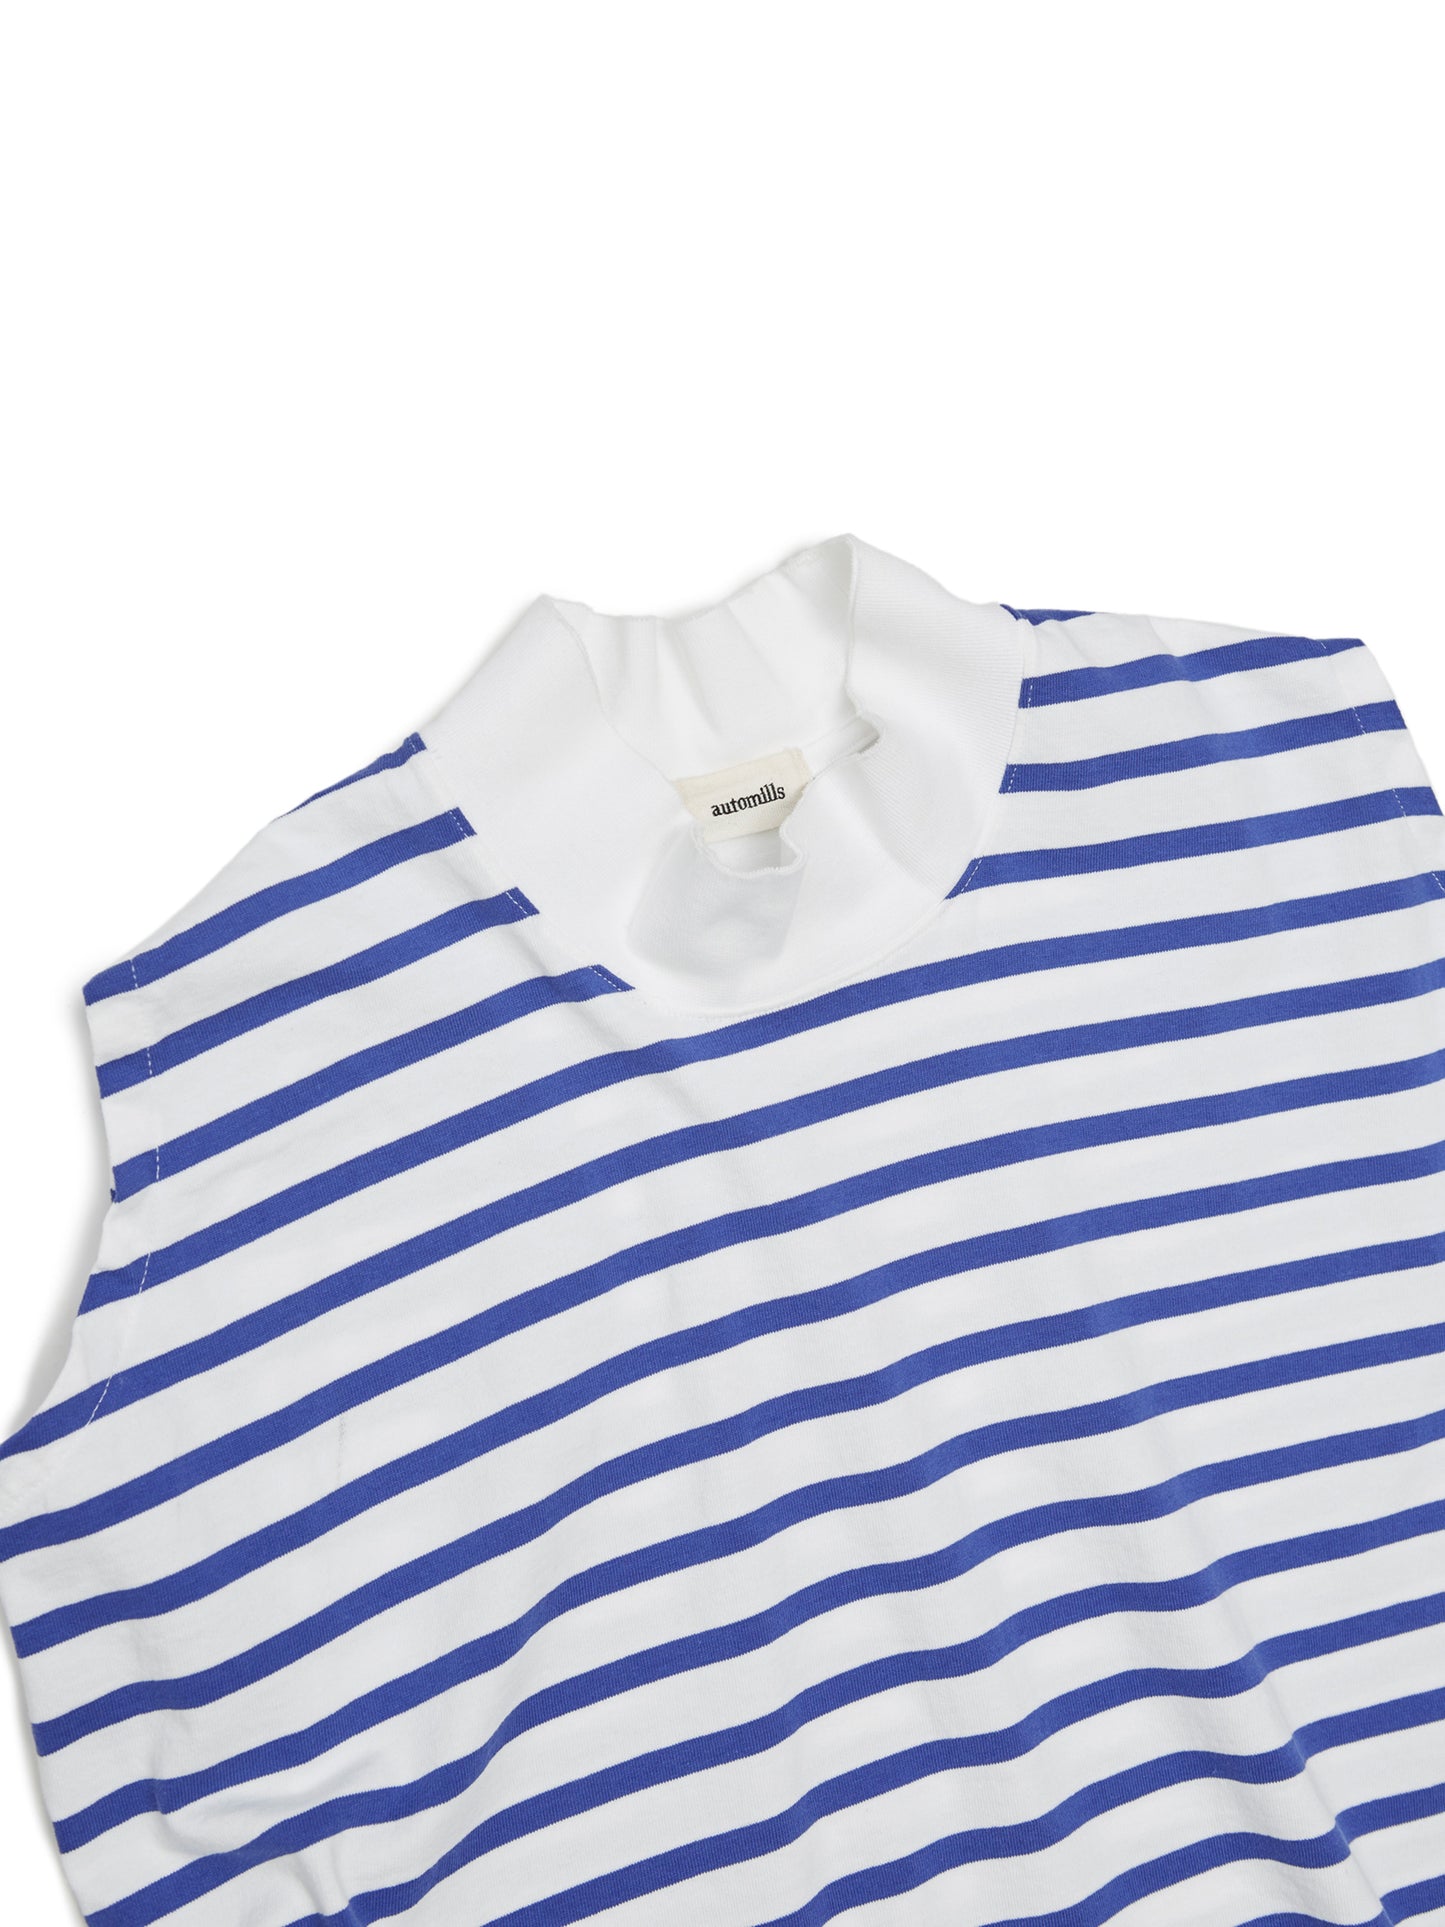 BAGGY N/S TEE COTTON BORDER JERSEY AM-C0204 White/Blue